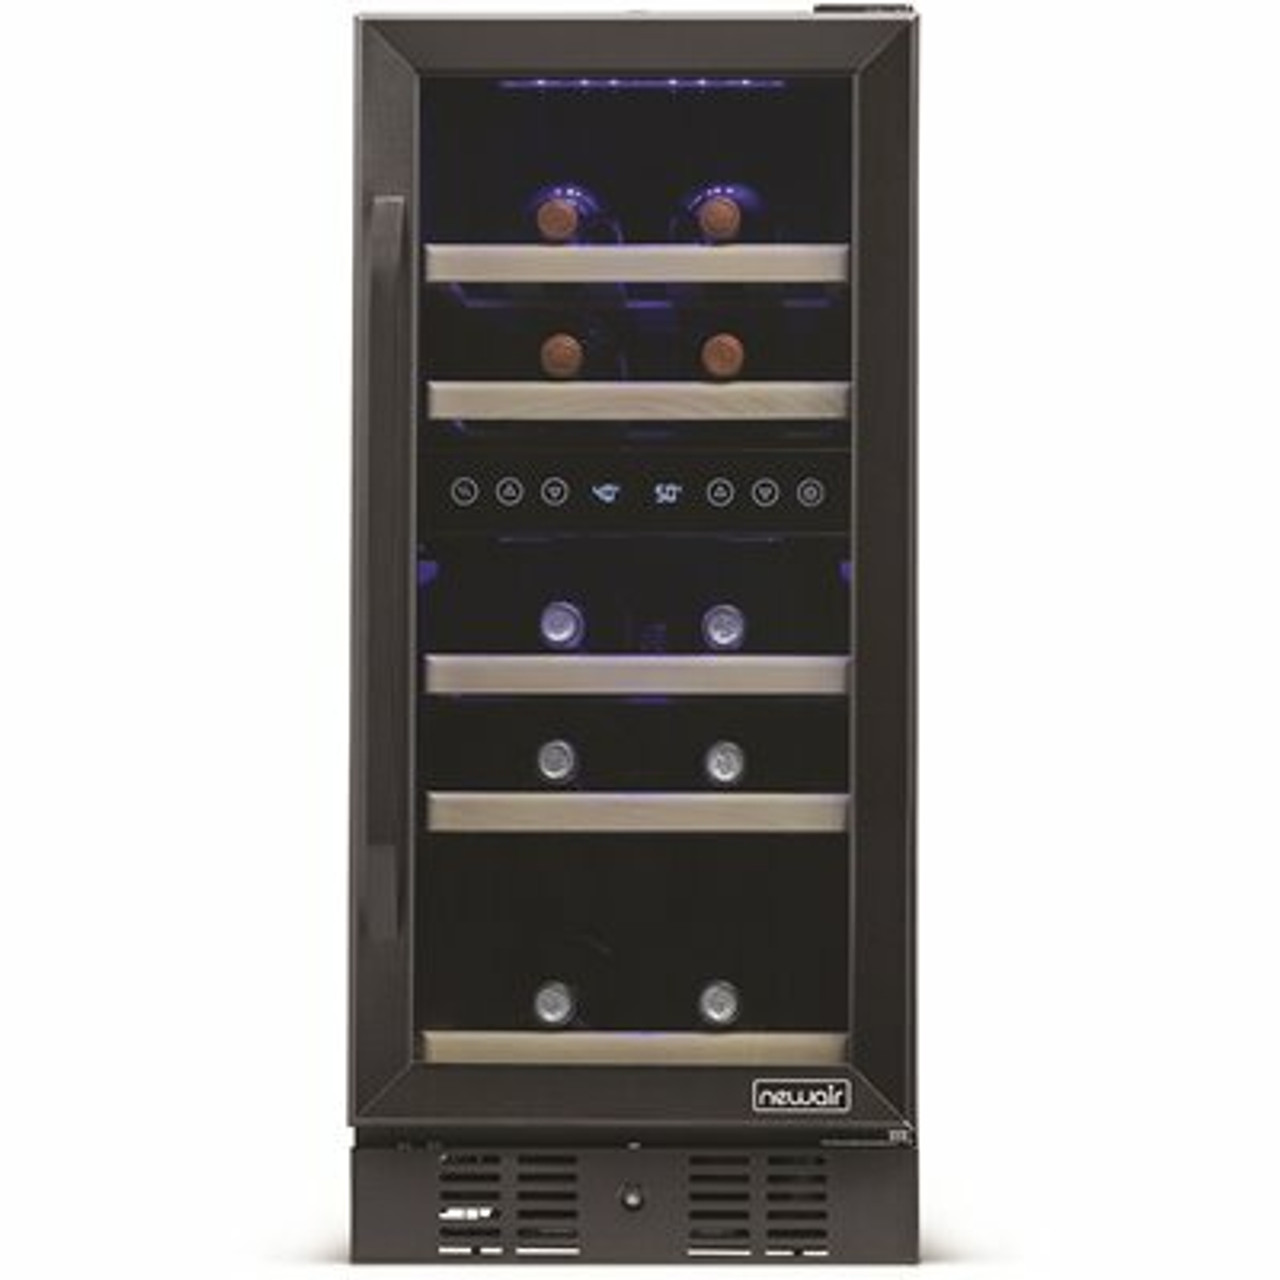 Dual Zone 15 In. 29-Bottle Built-In Wine Cooler Fridge With Quiet Operation And Beech Wood Shelve, Black Stainless Steel